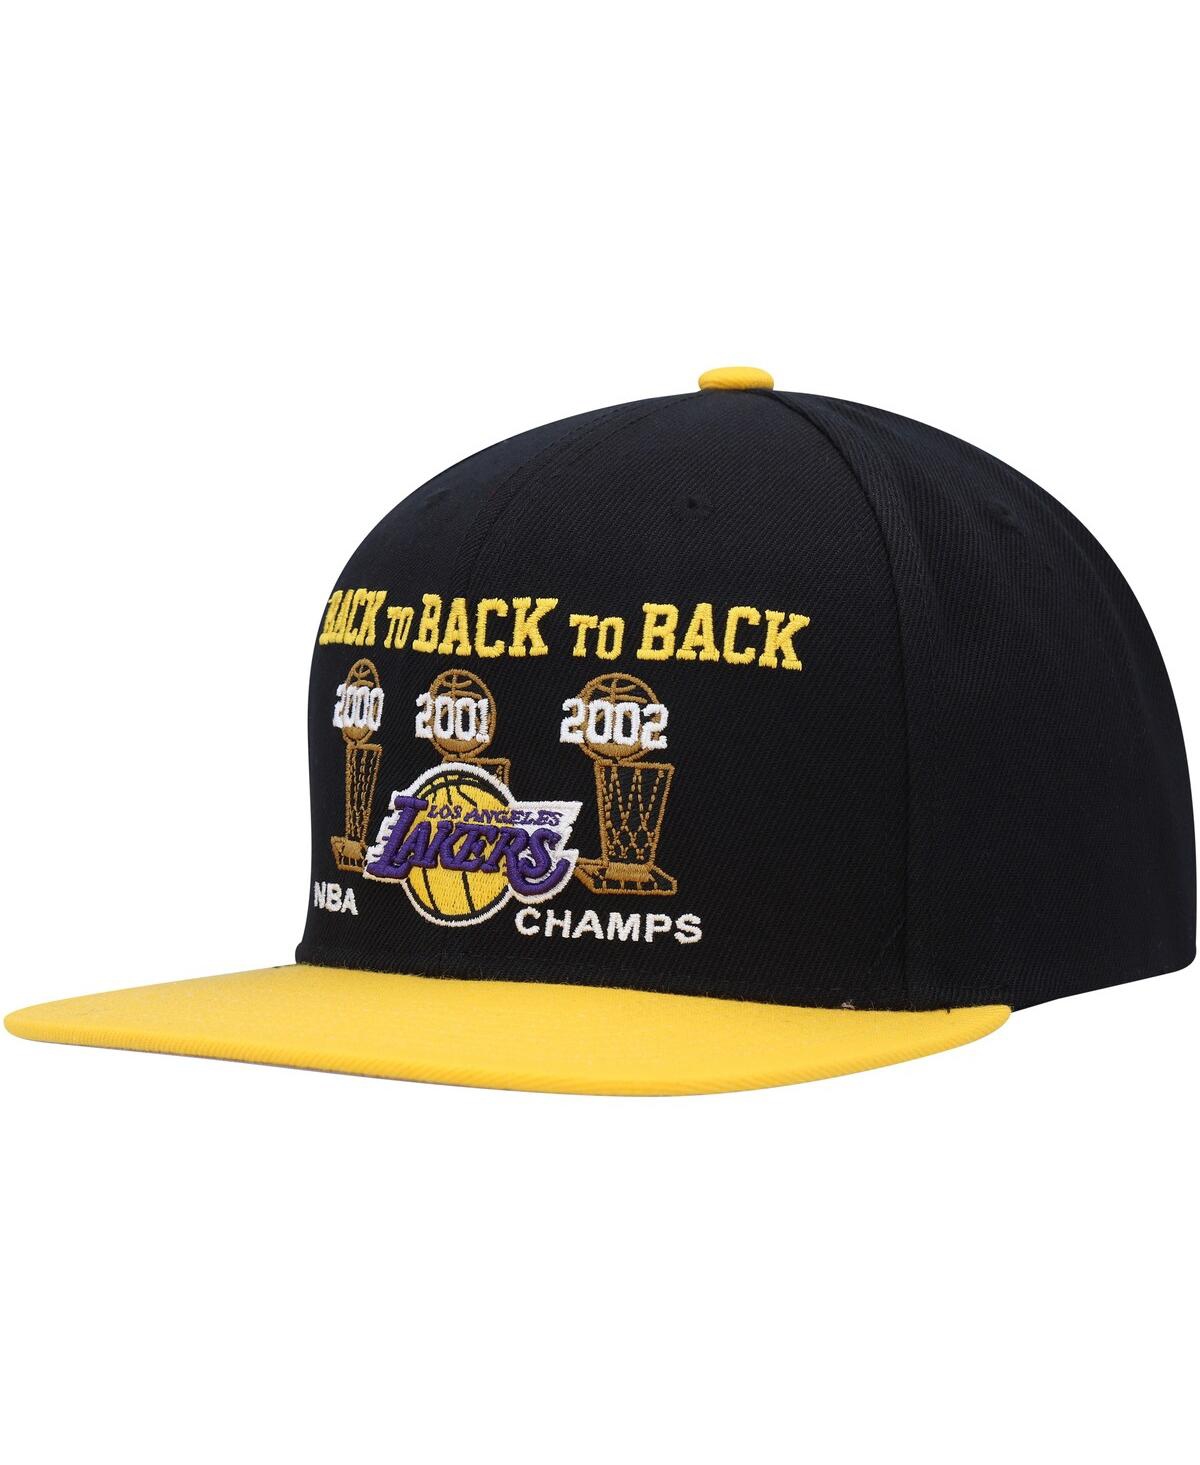 MITCHELL & NESS MEN'S MITCHELL & NESS BLACK, GOLD LOS ANGELES LAKERS HARDWOOD CLASSICS BACK-TO-BACK-TO-BACK NBA CHAM